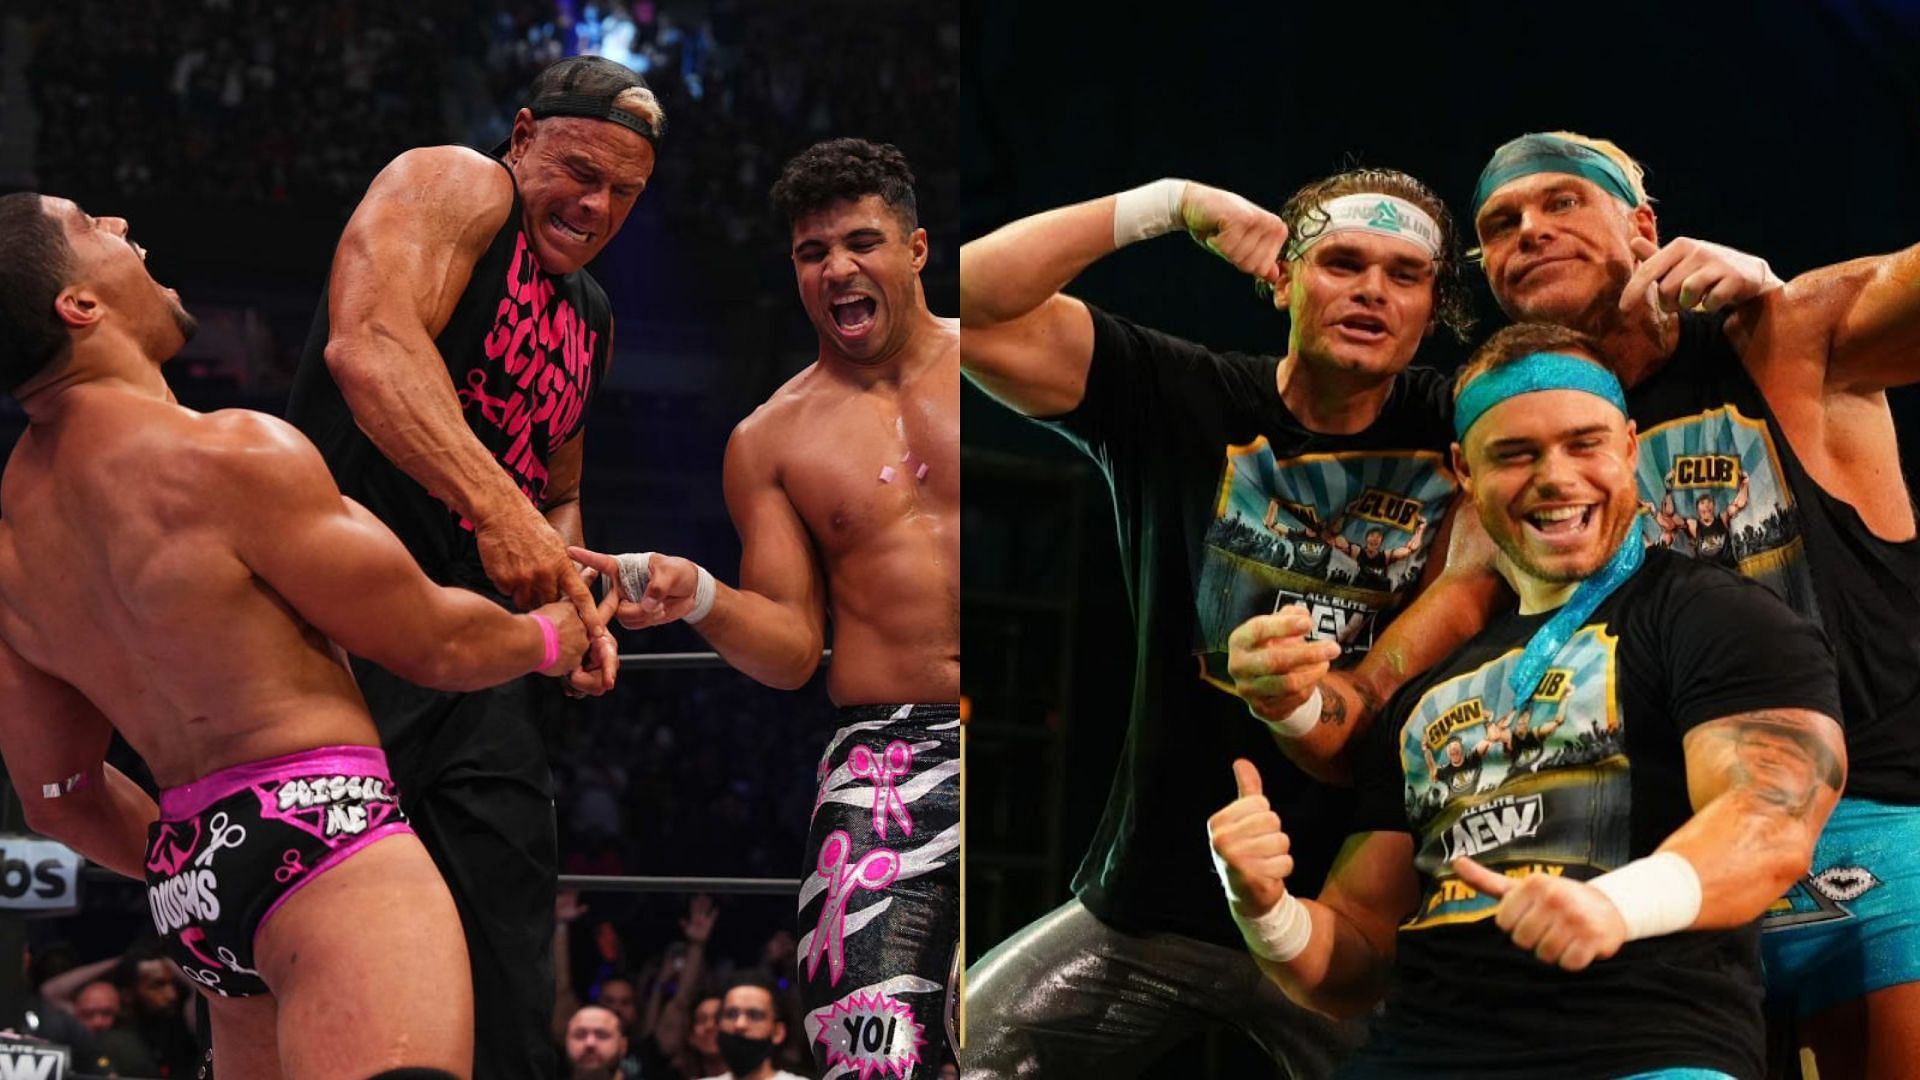 What did Billy Gunn do in the AEW Tag Team Title Match?